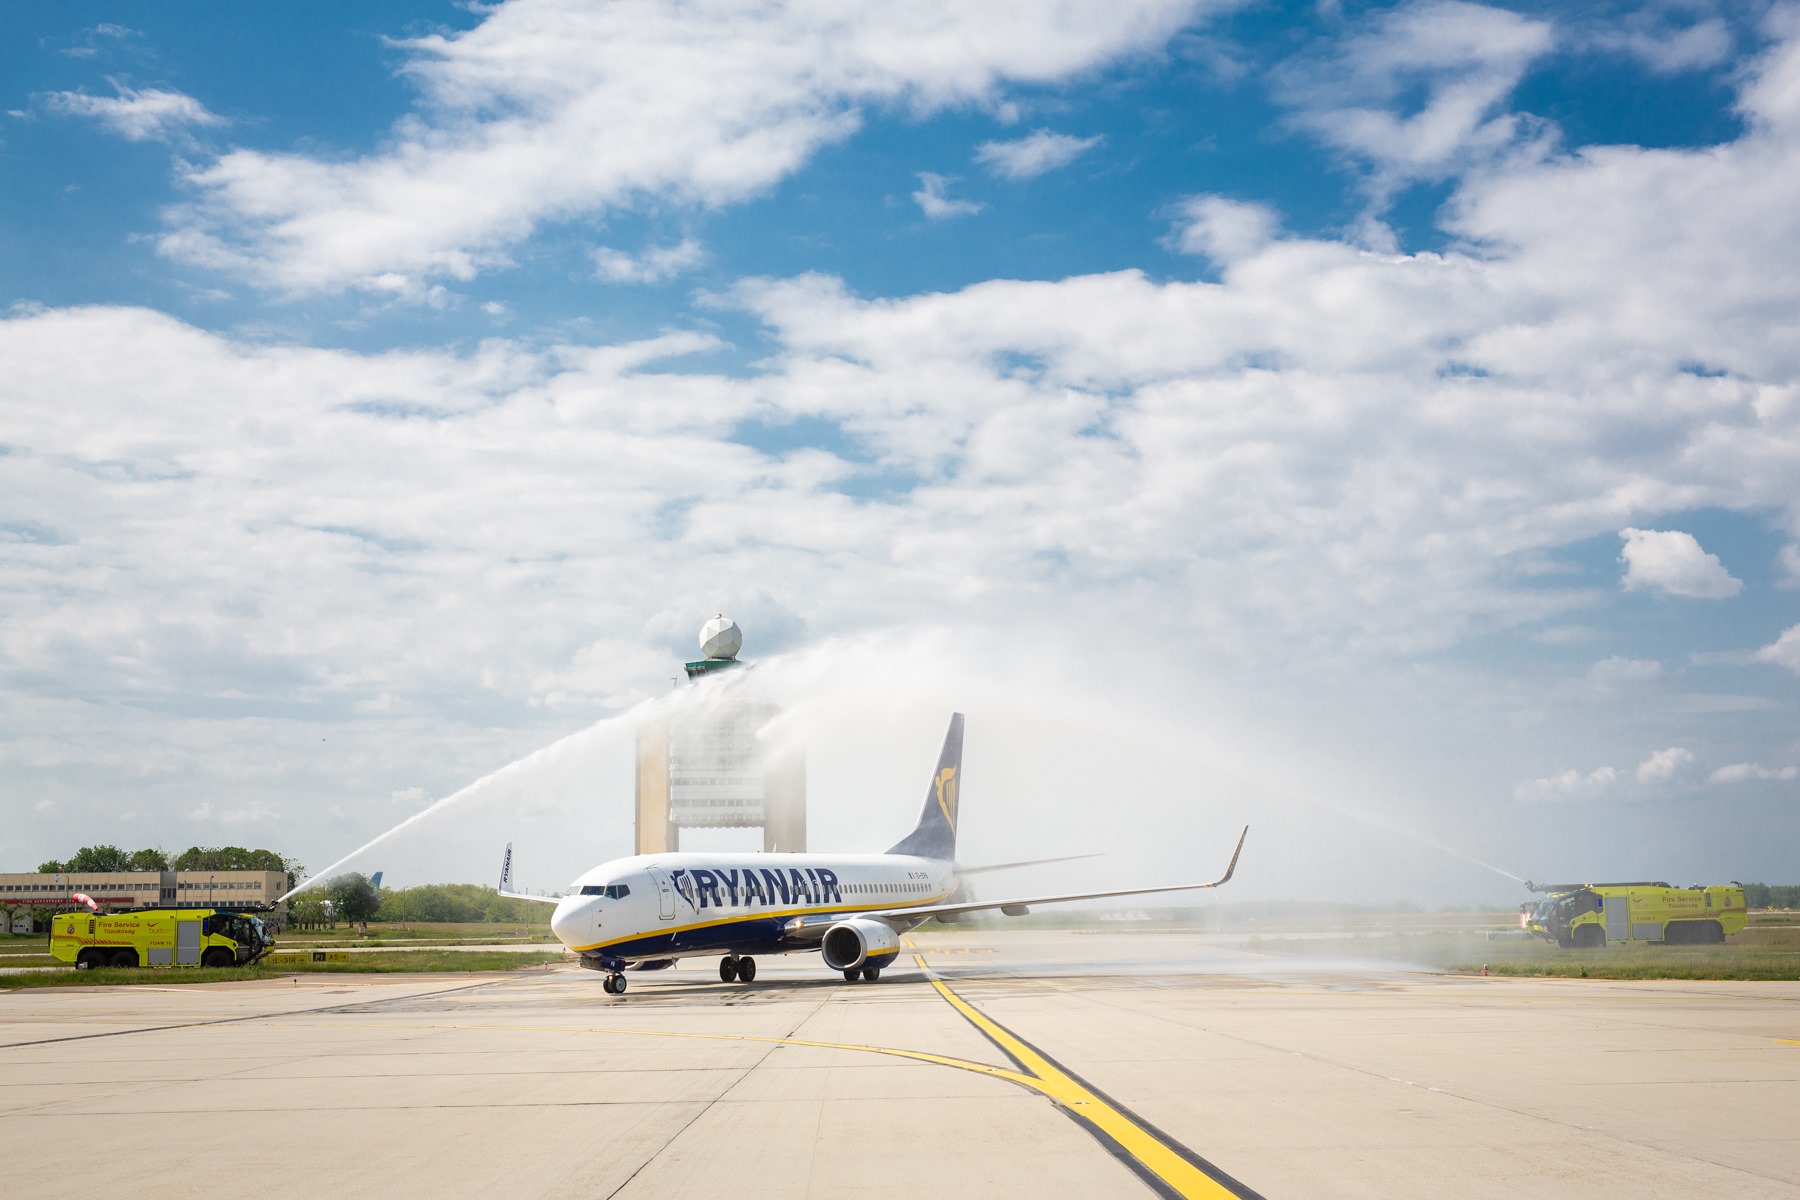 92% Of Ryanair Flights Arrived On Time In May (Excl Atc)